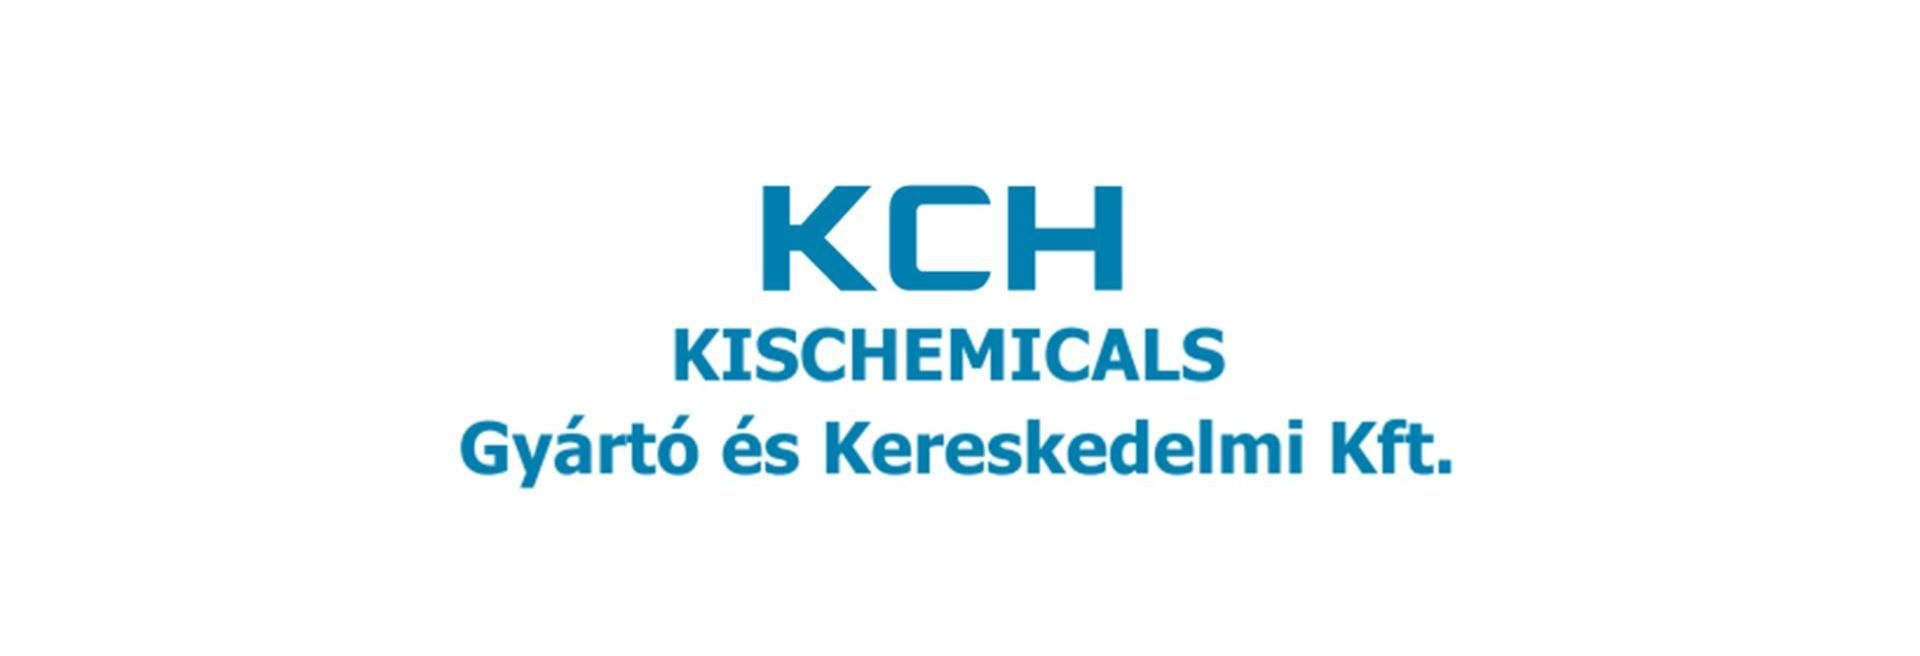 Kischemicals is to increase its manufacturing capacity in Sajóbábony - VIDEO REPORT